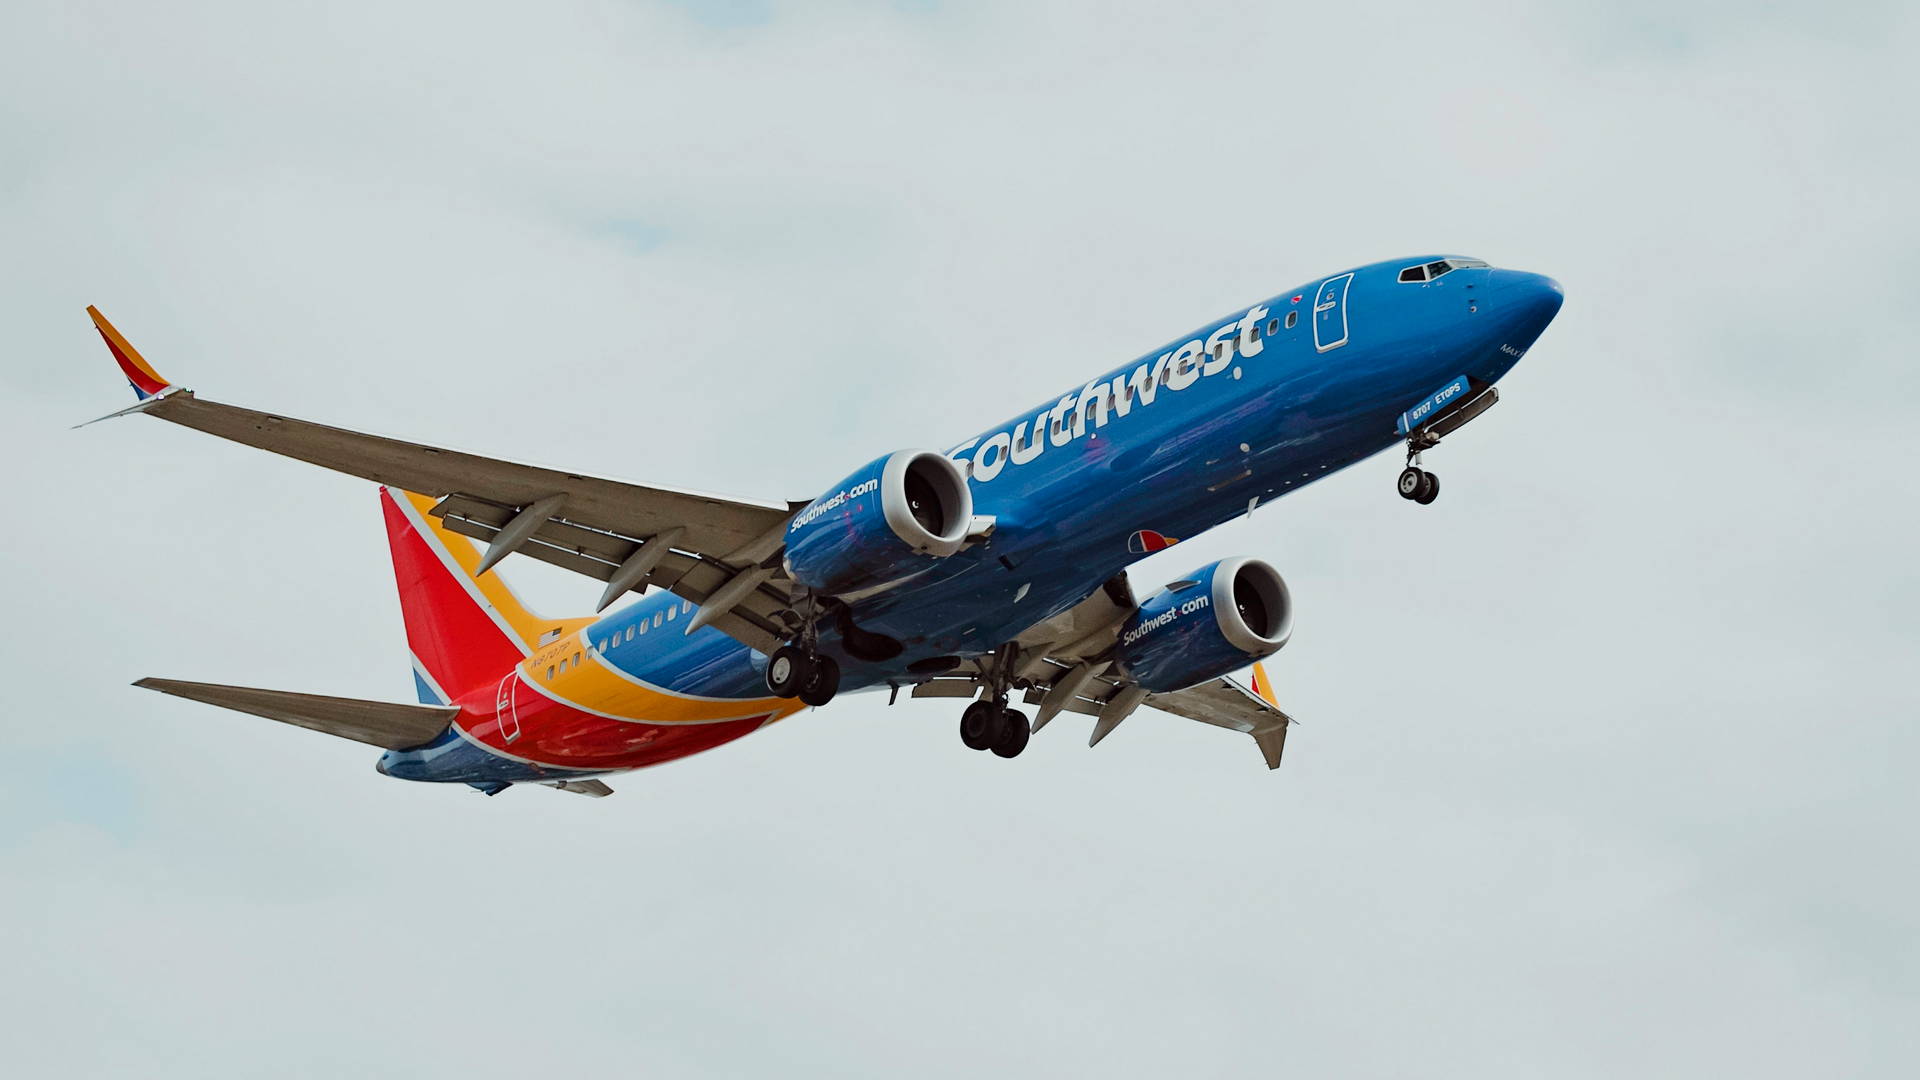 Southwest Increases 737 MAX Order By 108 Aircraft!